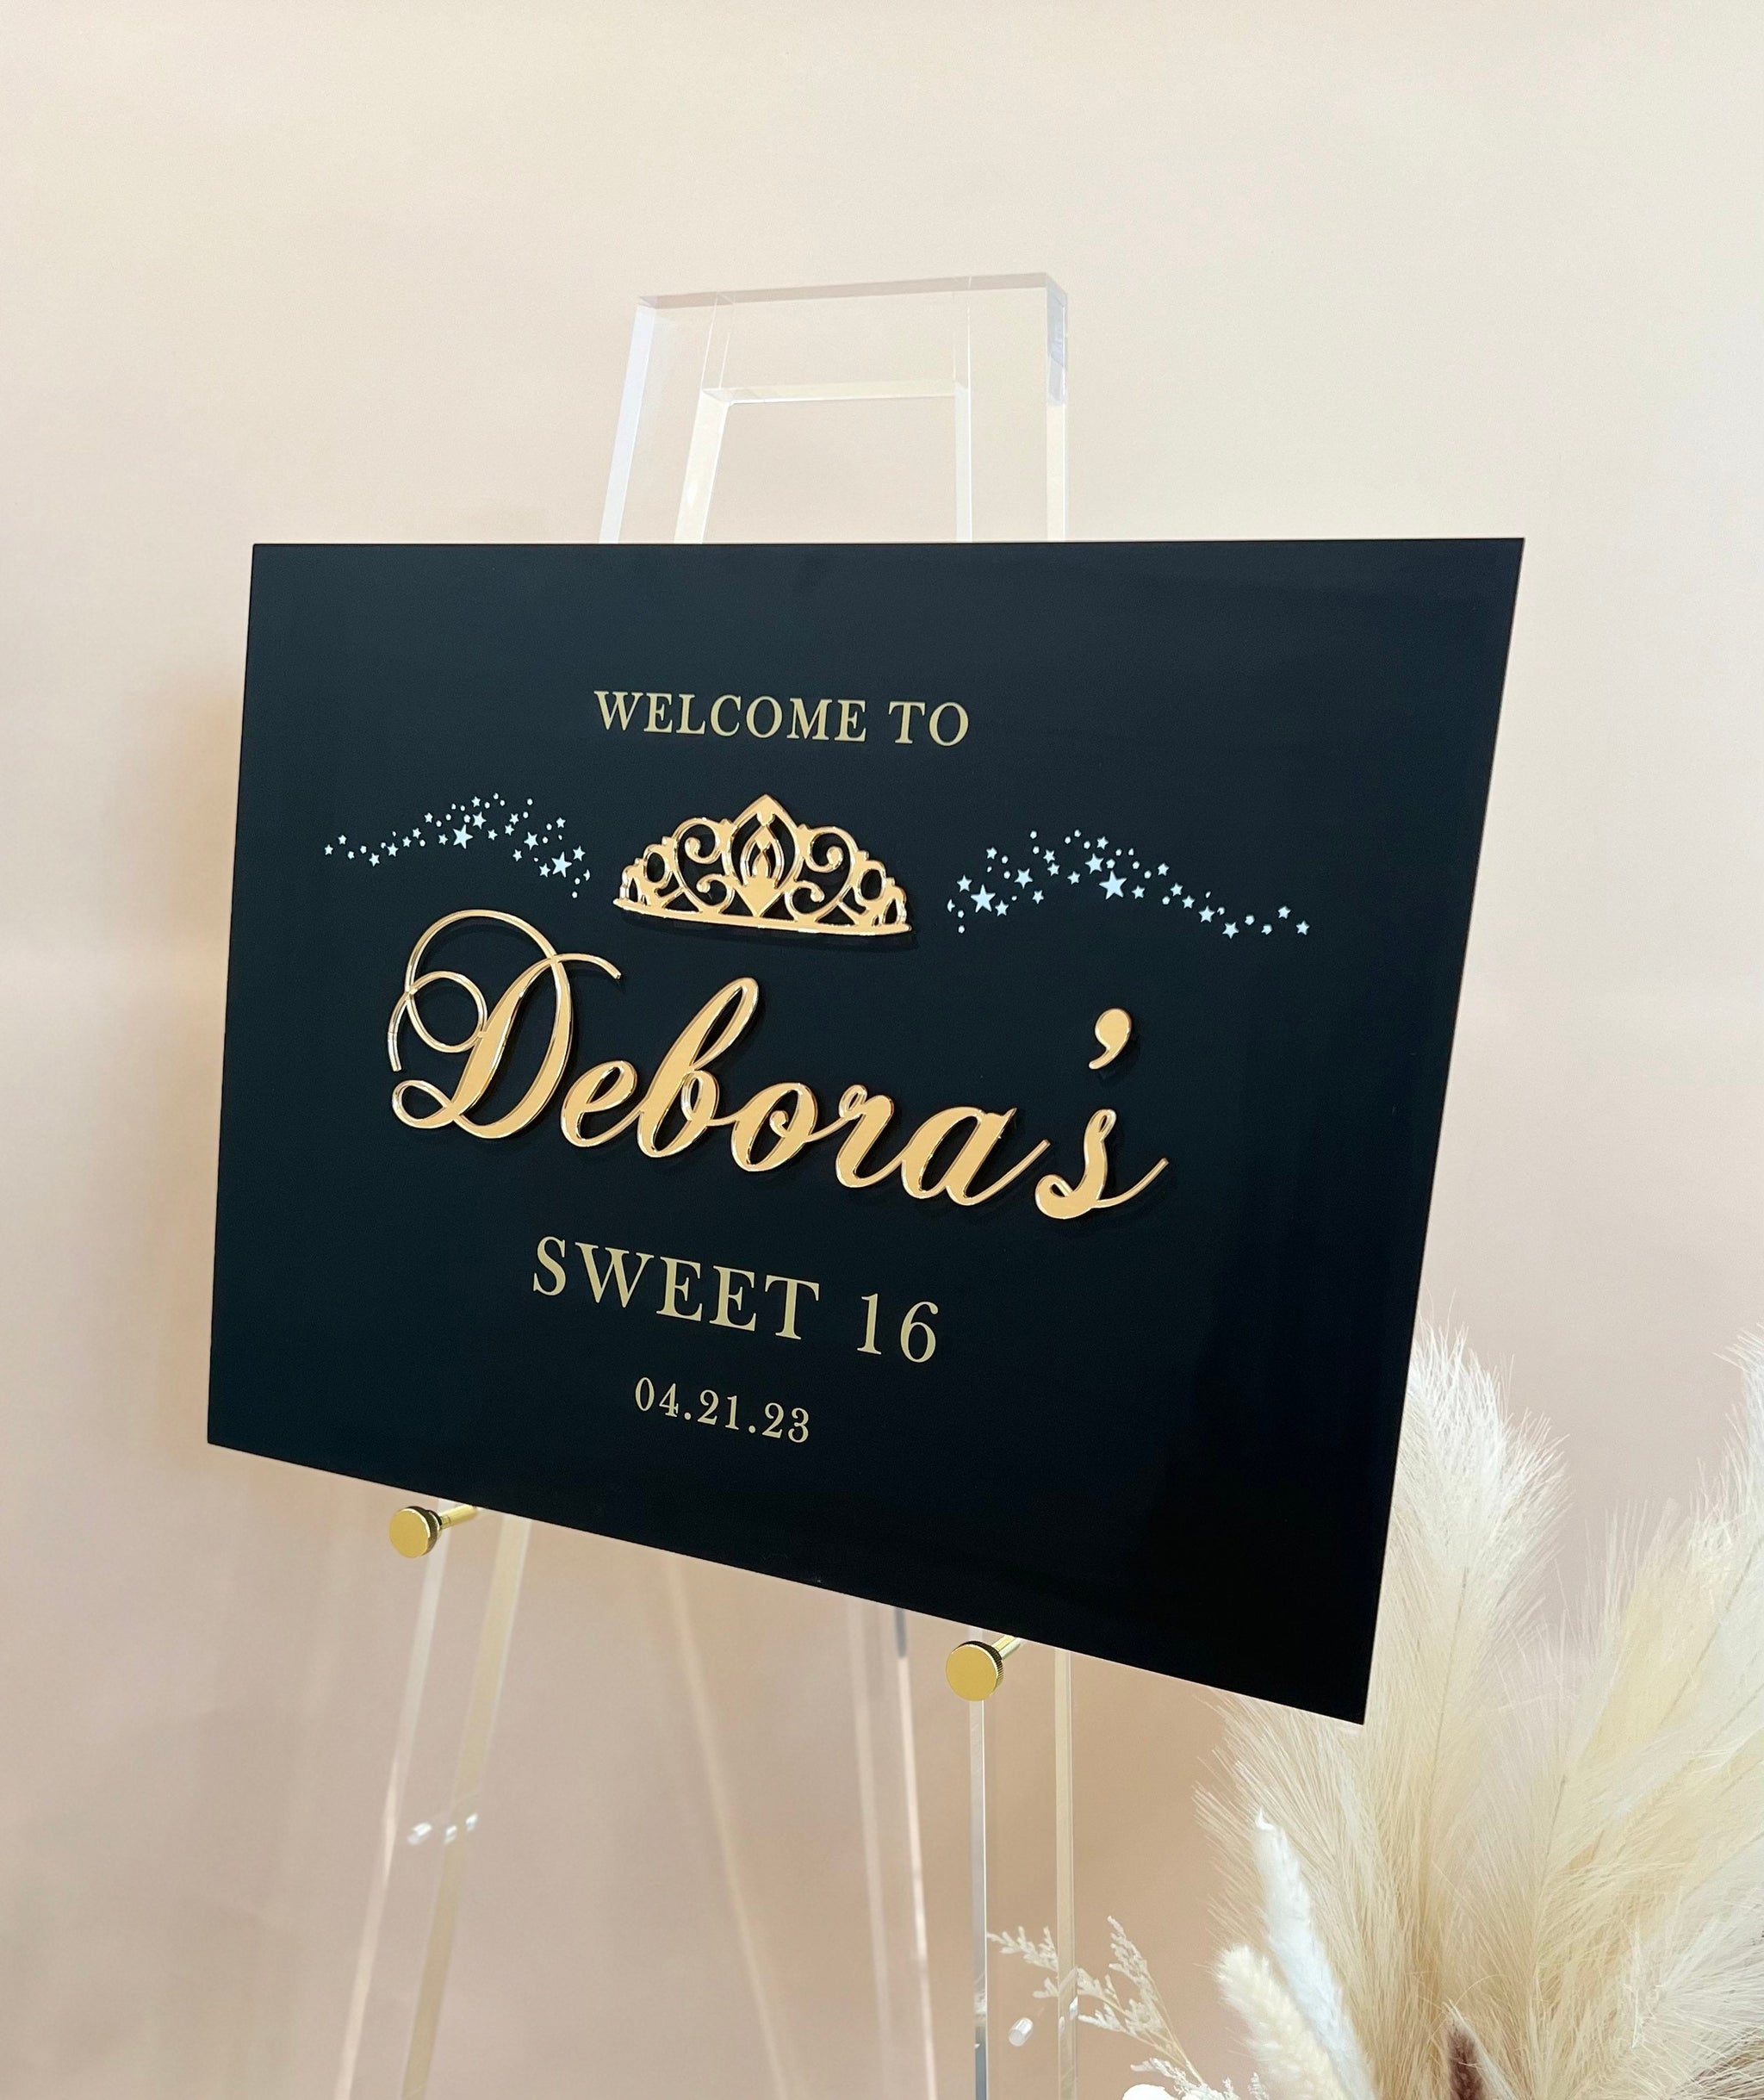 Quinceanera Decal for Mirror or Sign Making Welcome to Quinceanera Vinyl  Decal Blush Pink and Gold Quince Sign Birthday Decal